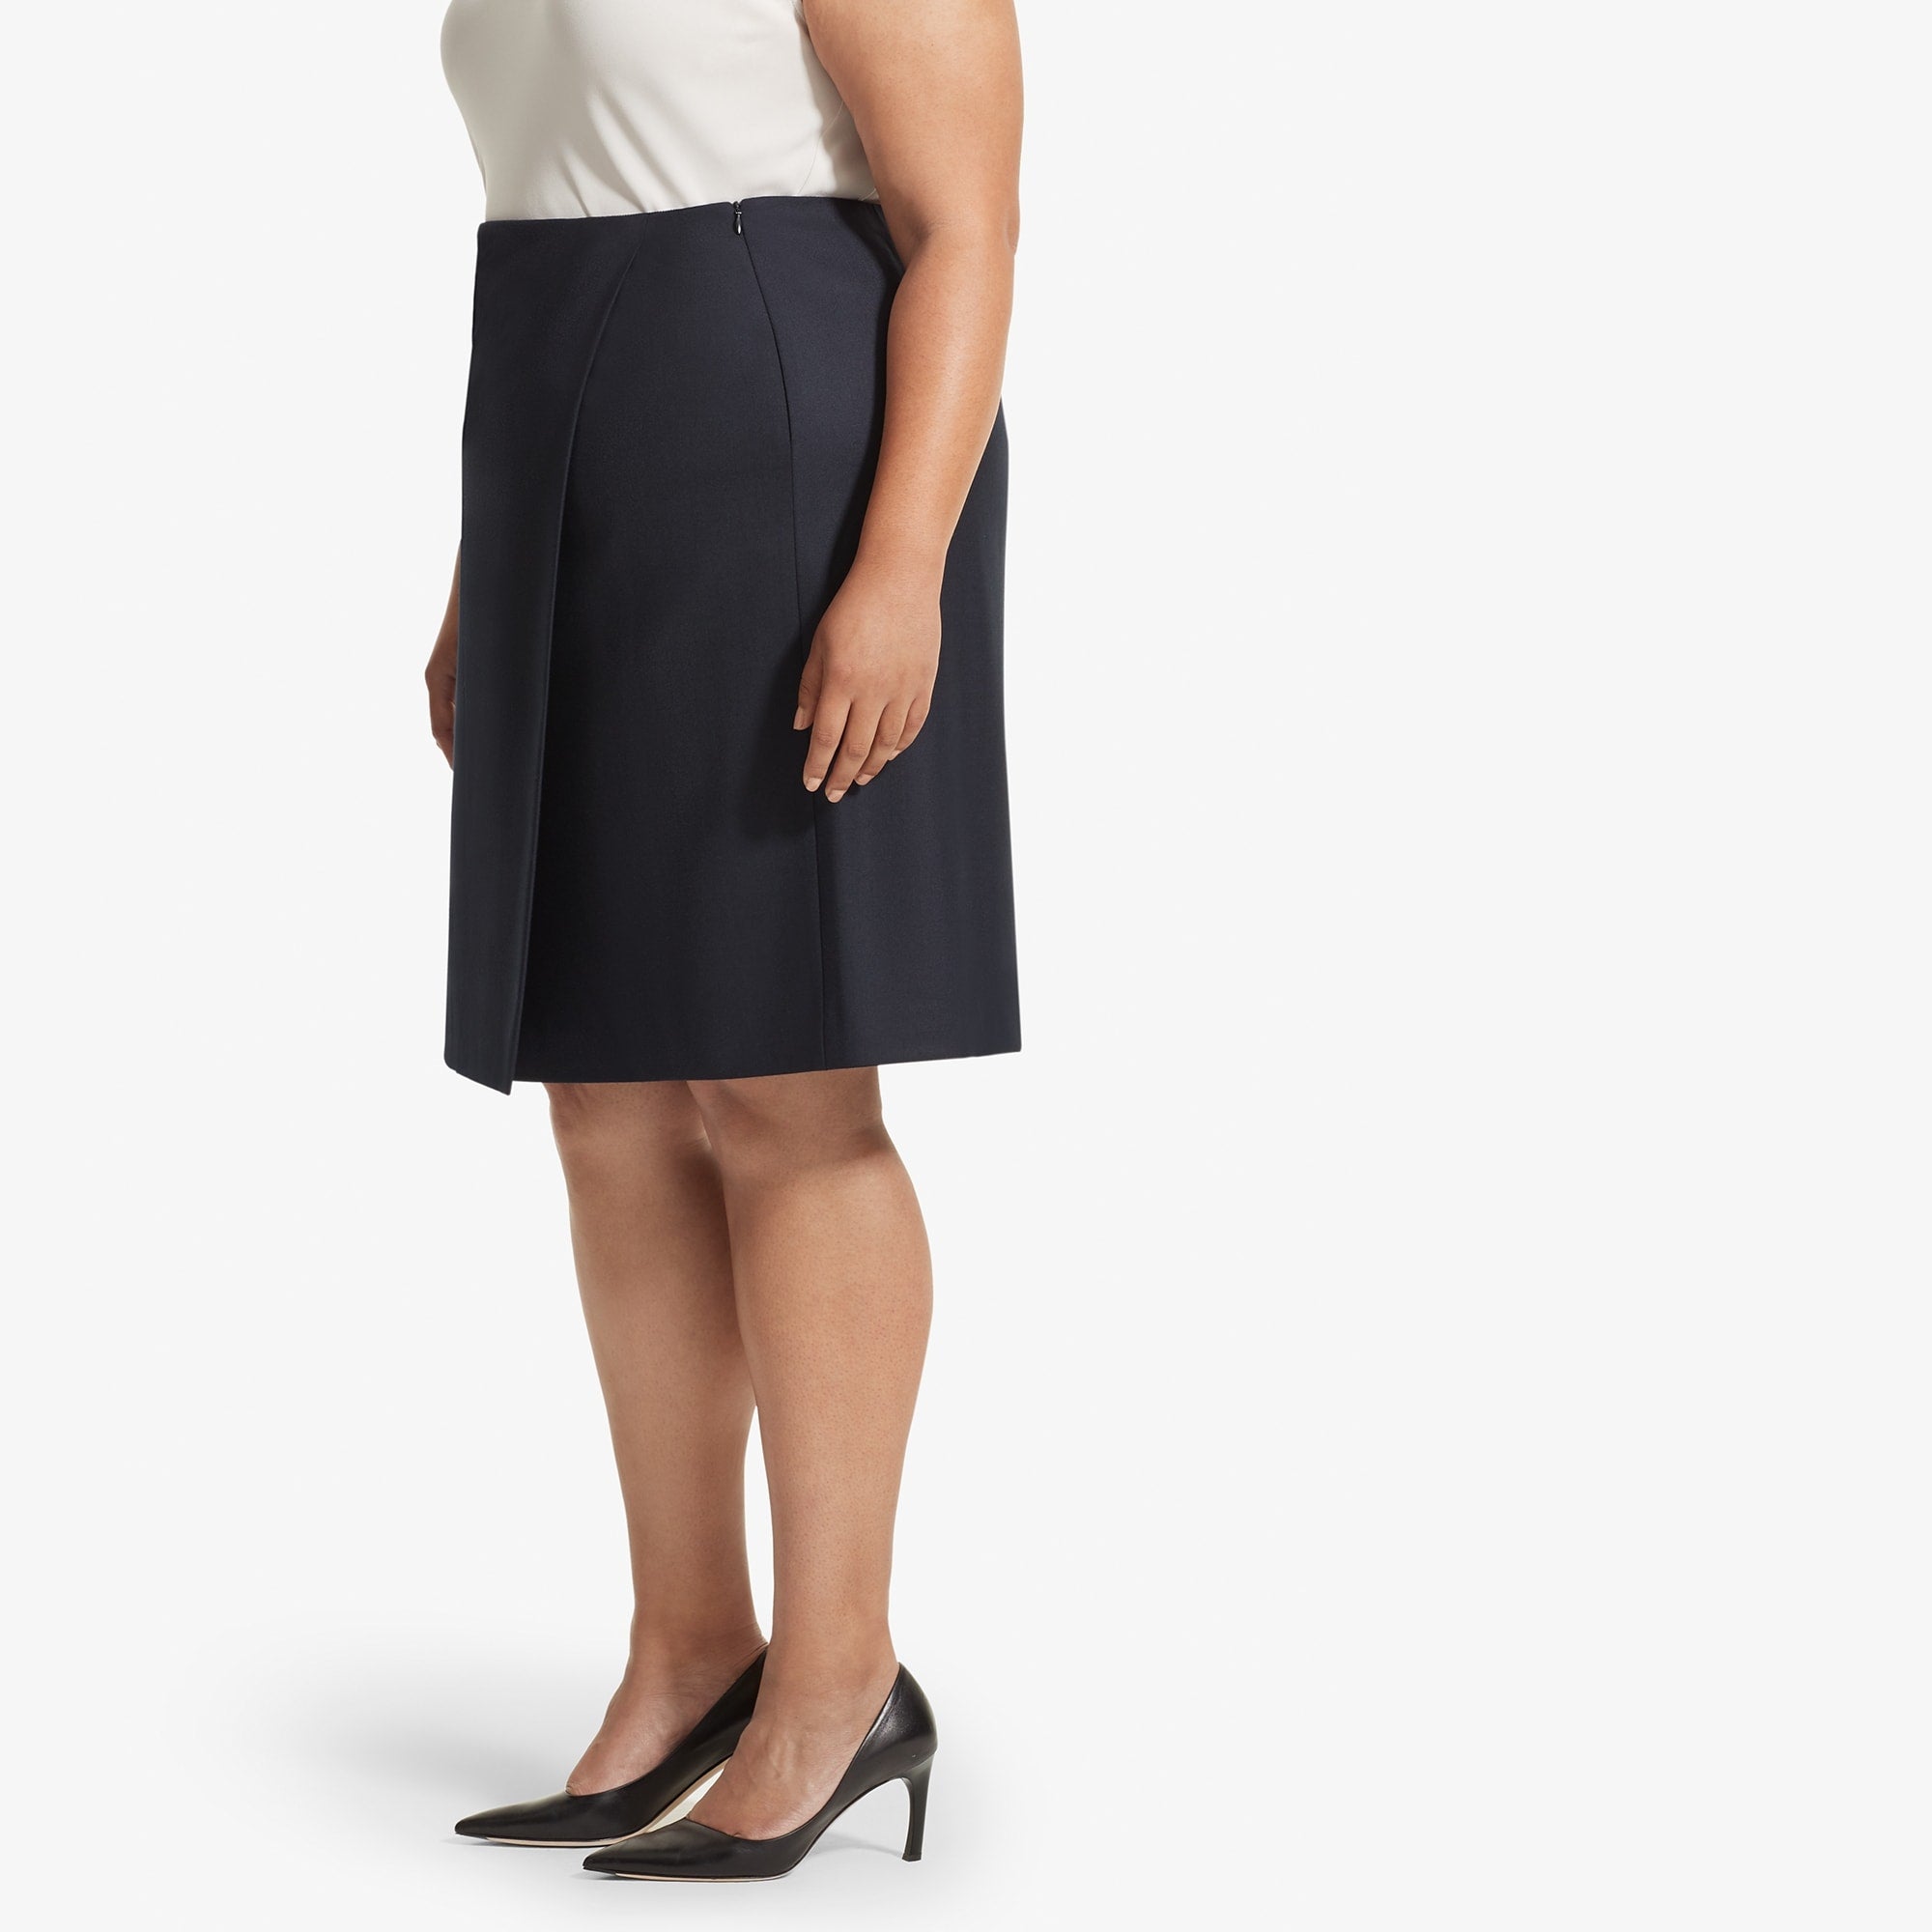 Side image of a woman standing wearing the Logan skirt sharkskin in Ink